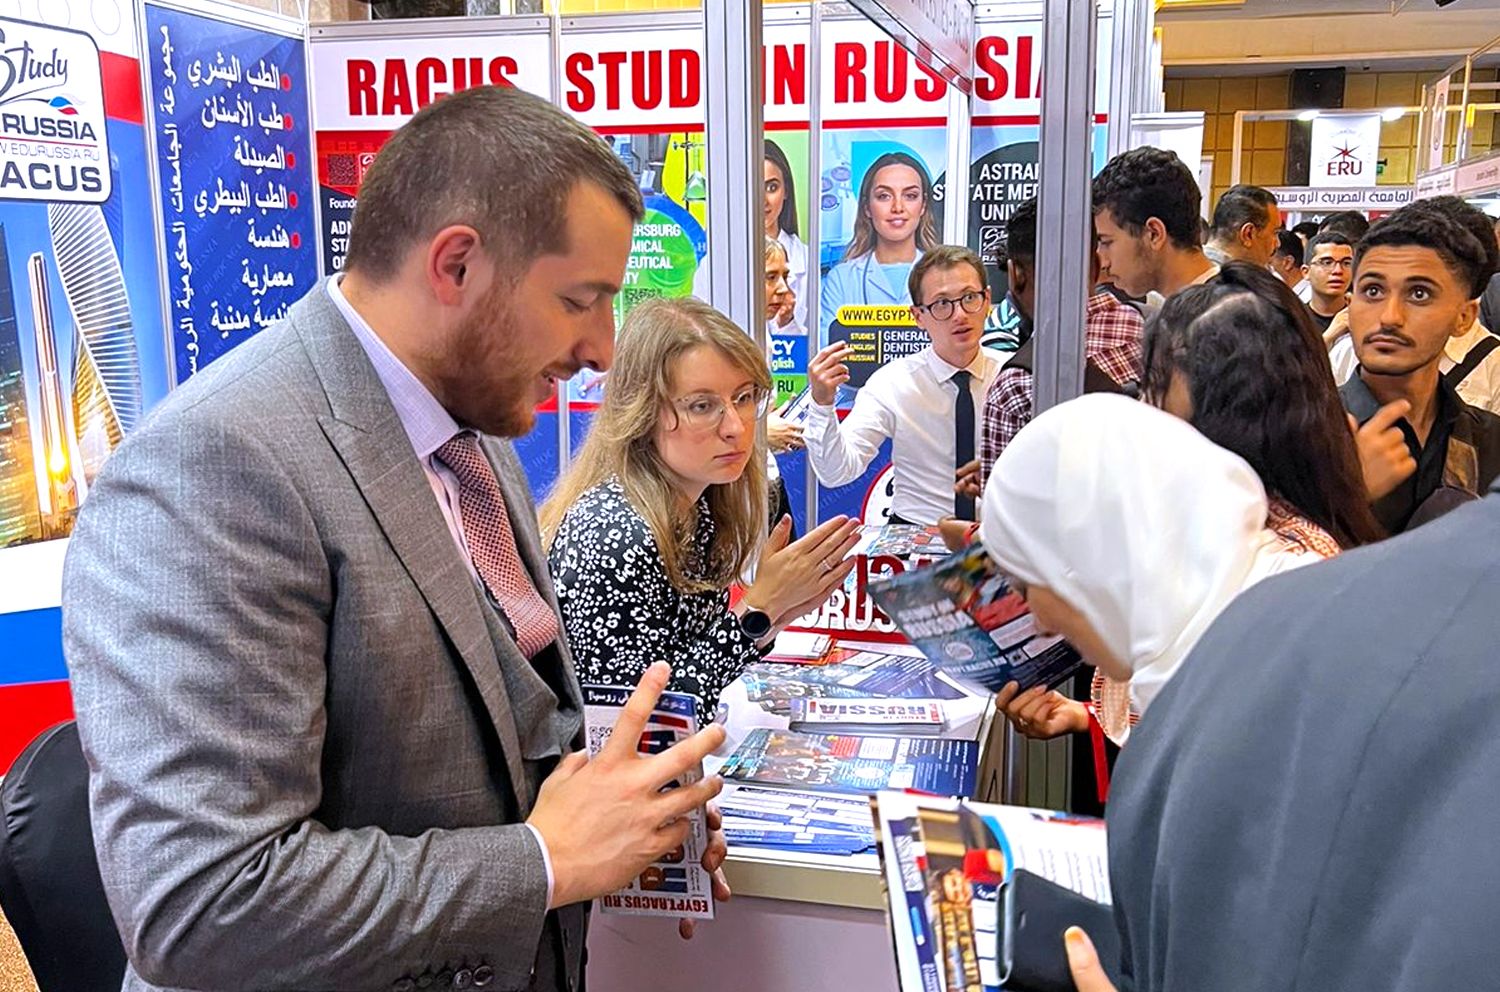 All the candidates were also invited to visit the organisation's office in Egypt for a more detailed consultation. A fascinating presentation in Arabic with videos about studies in Russia was also given at the exhibition. All the RACUS stalls visitors received booklets with the key information about studies, as well as stylish souvenirs developed by the organisation's designers specifically for the Egyptian audience.